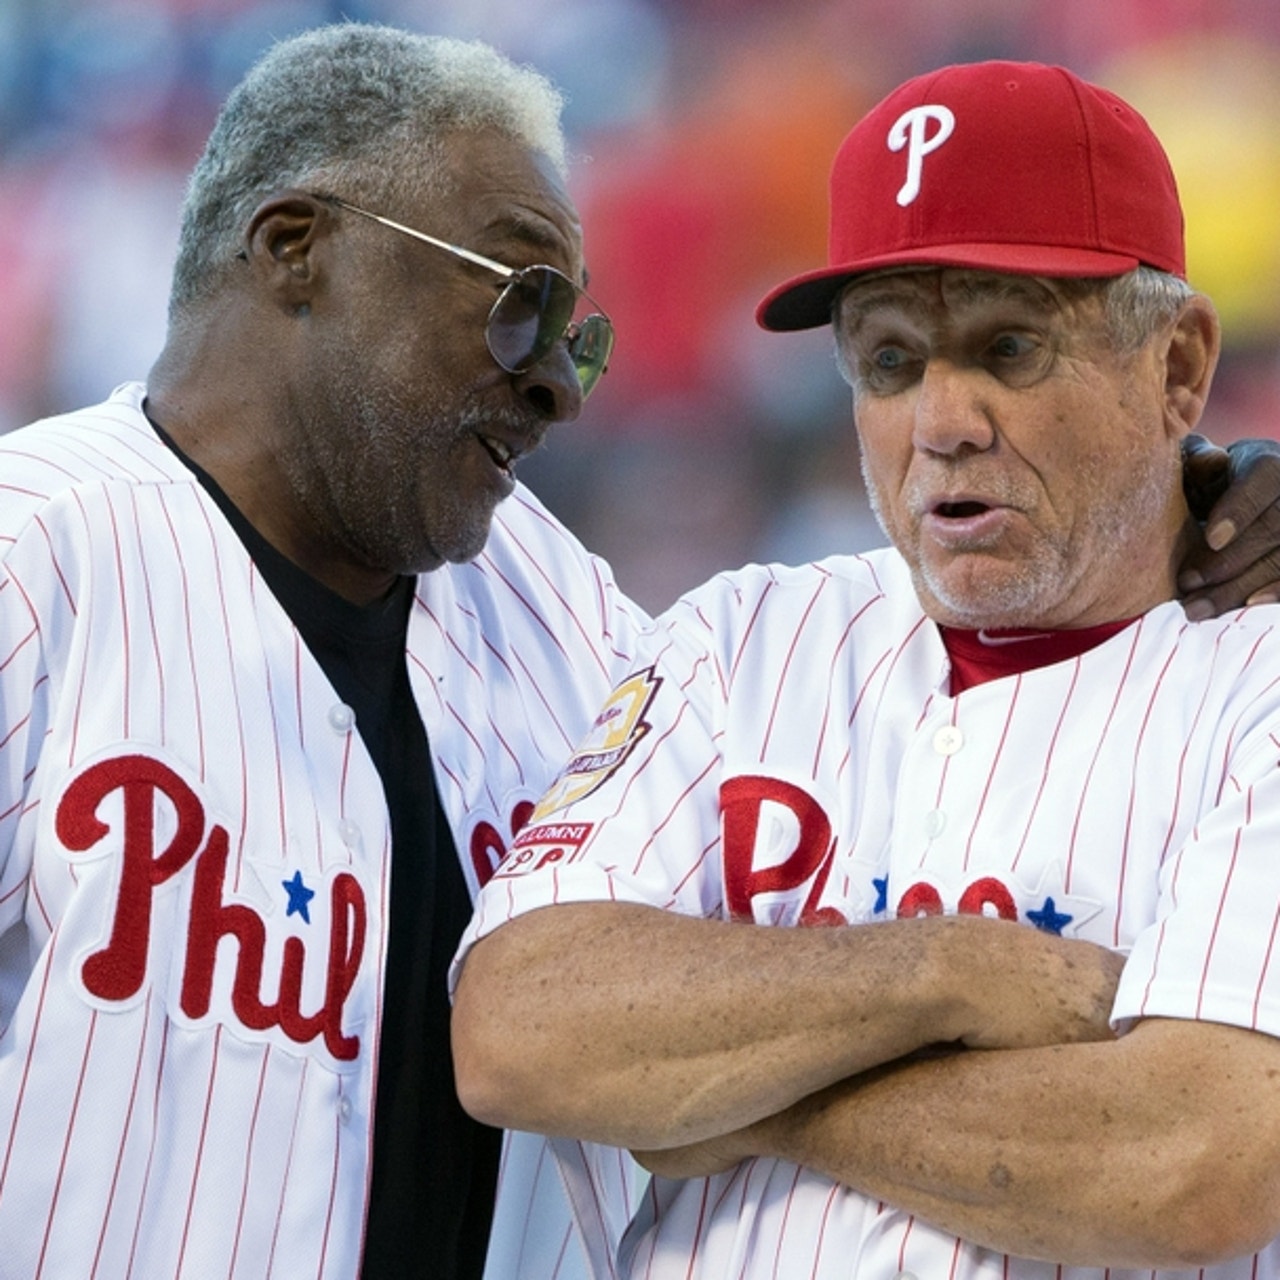 Phillies: Larry Bowa Spills the Beans on Phillies Trade